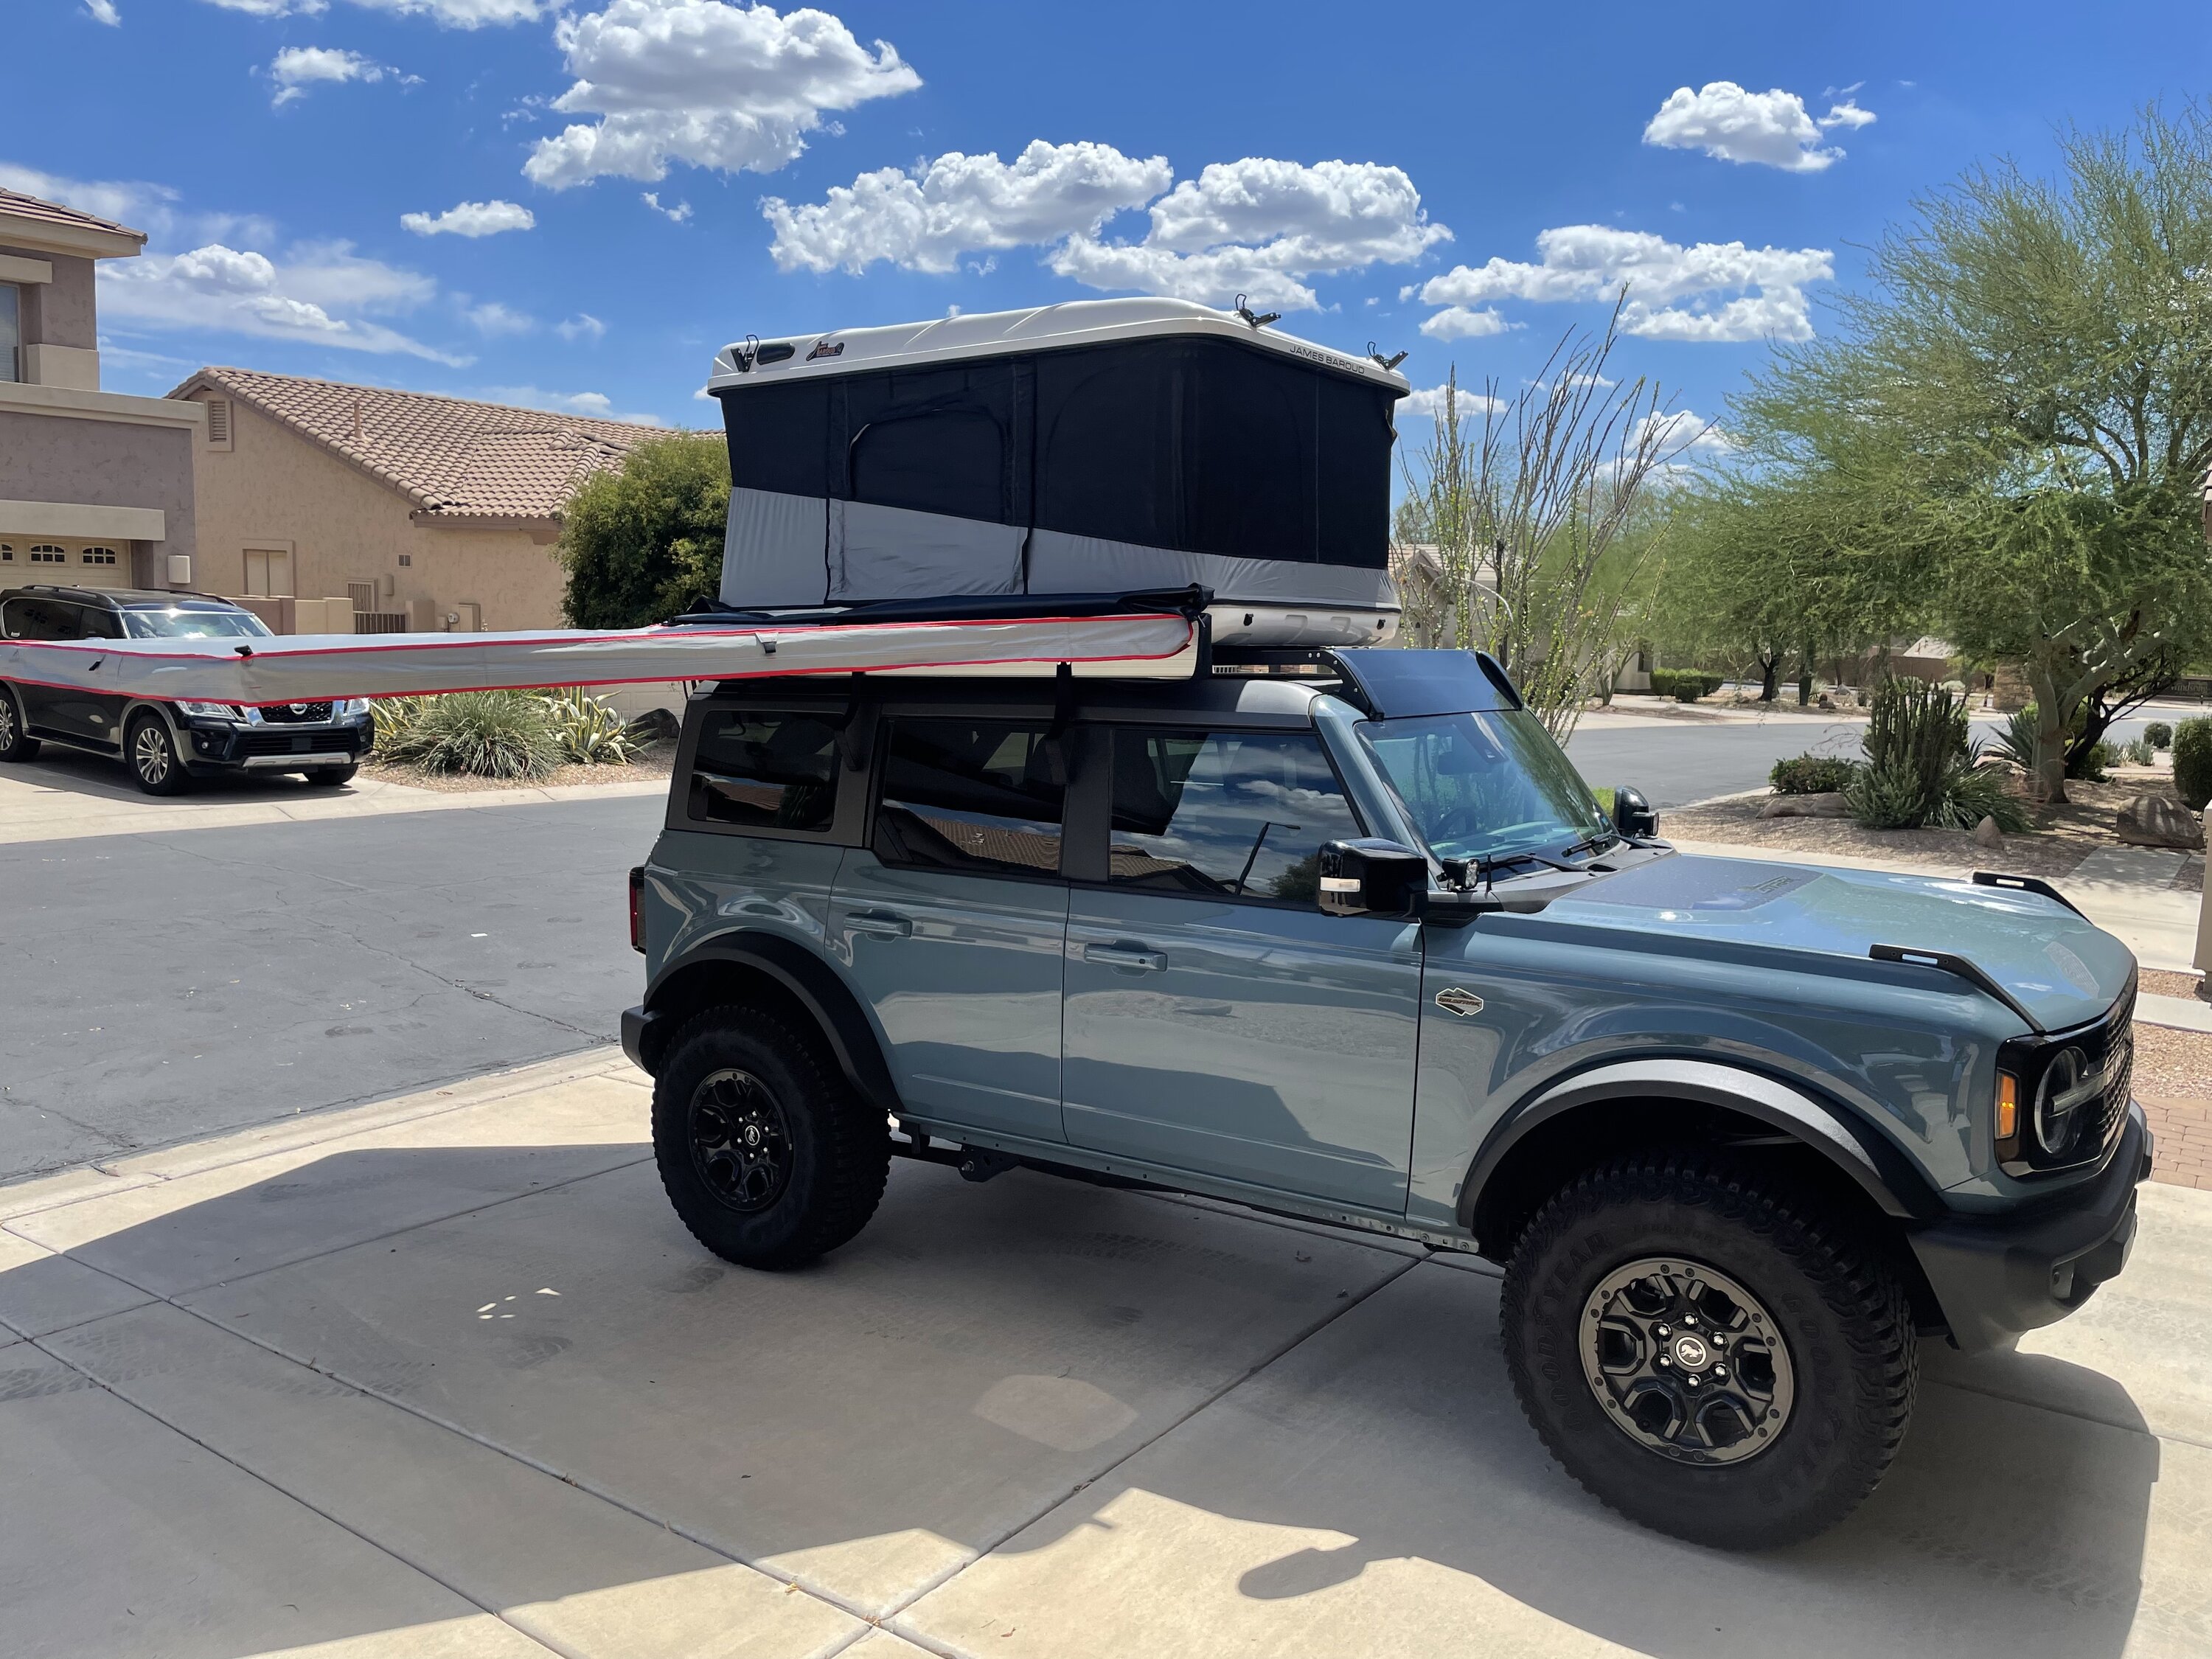 Ford Bronco Let's see your roof-top Tents and camping setups! passenger passthru and air connector